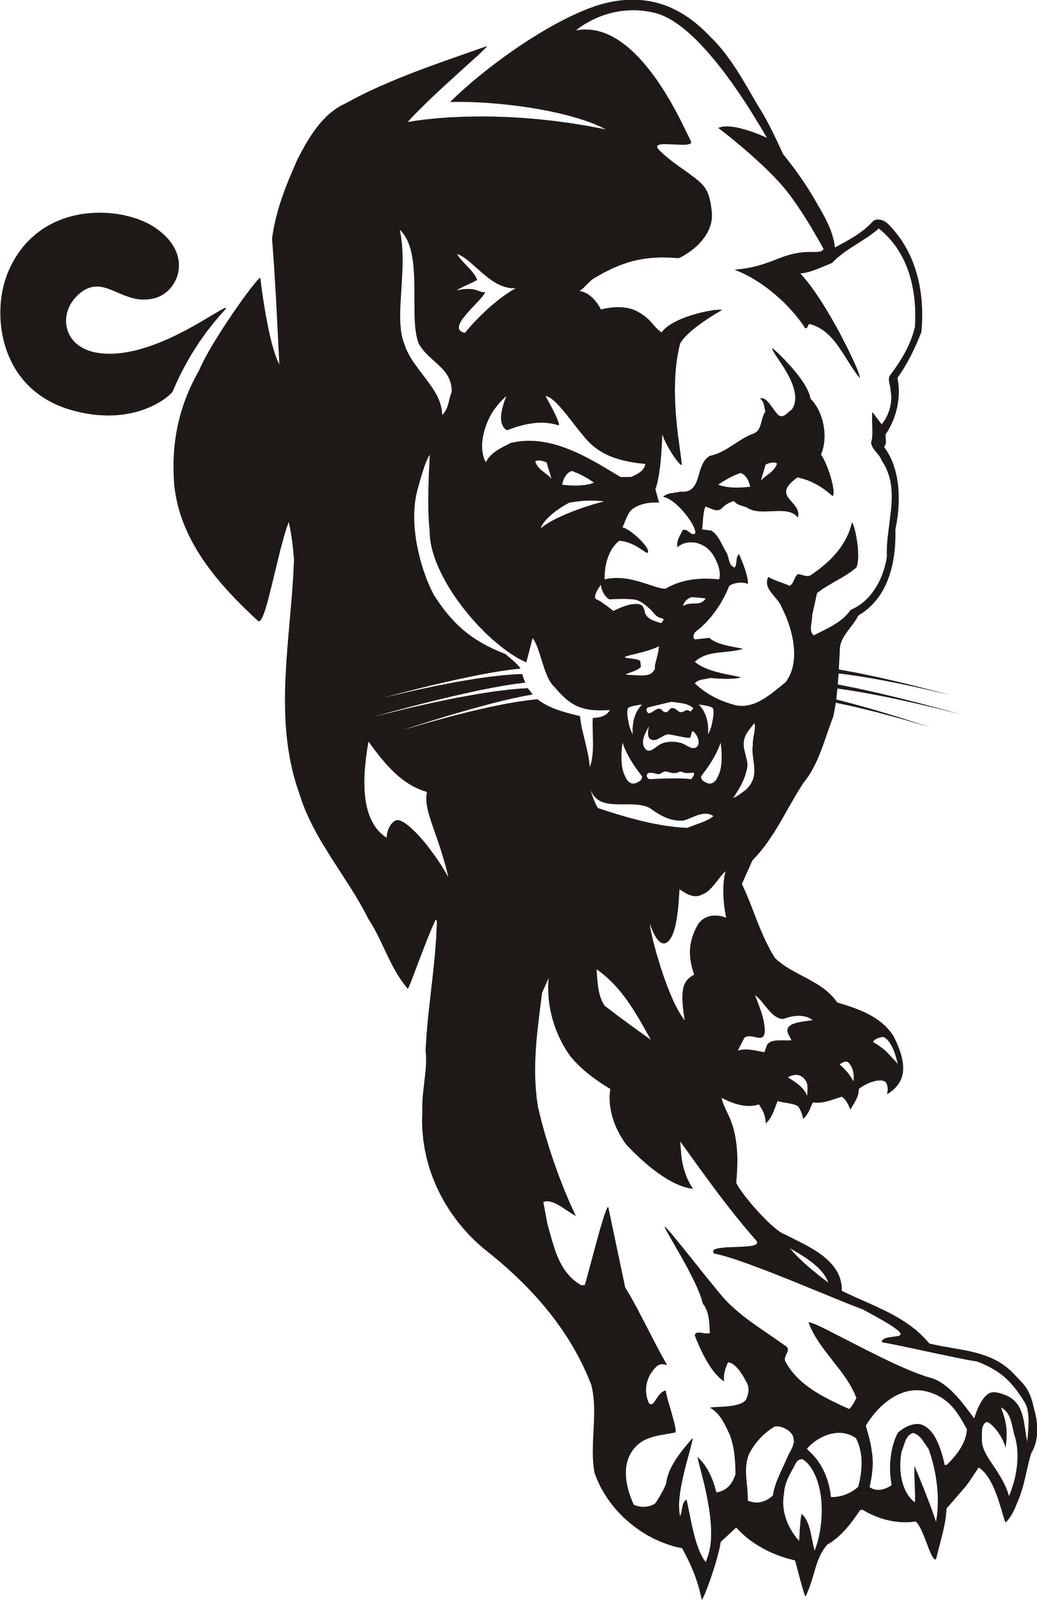 Cougar head clip art cougar panther mascot head vector graphic 